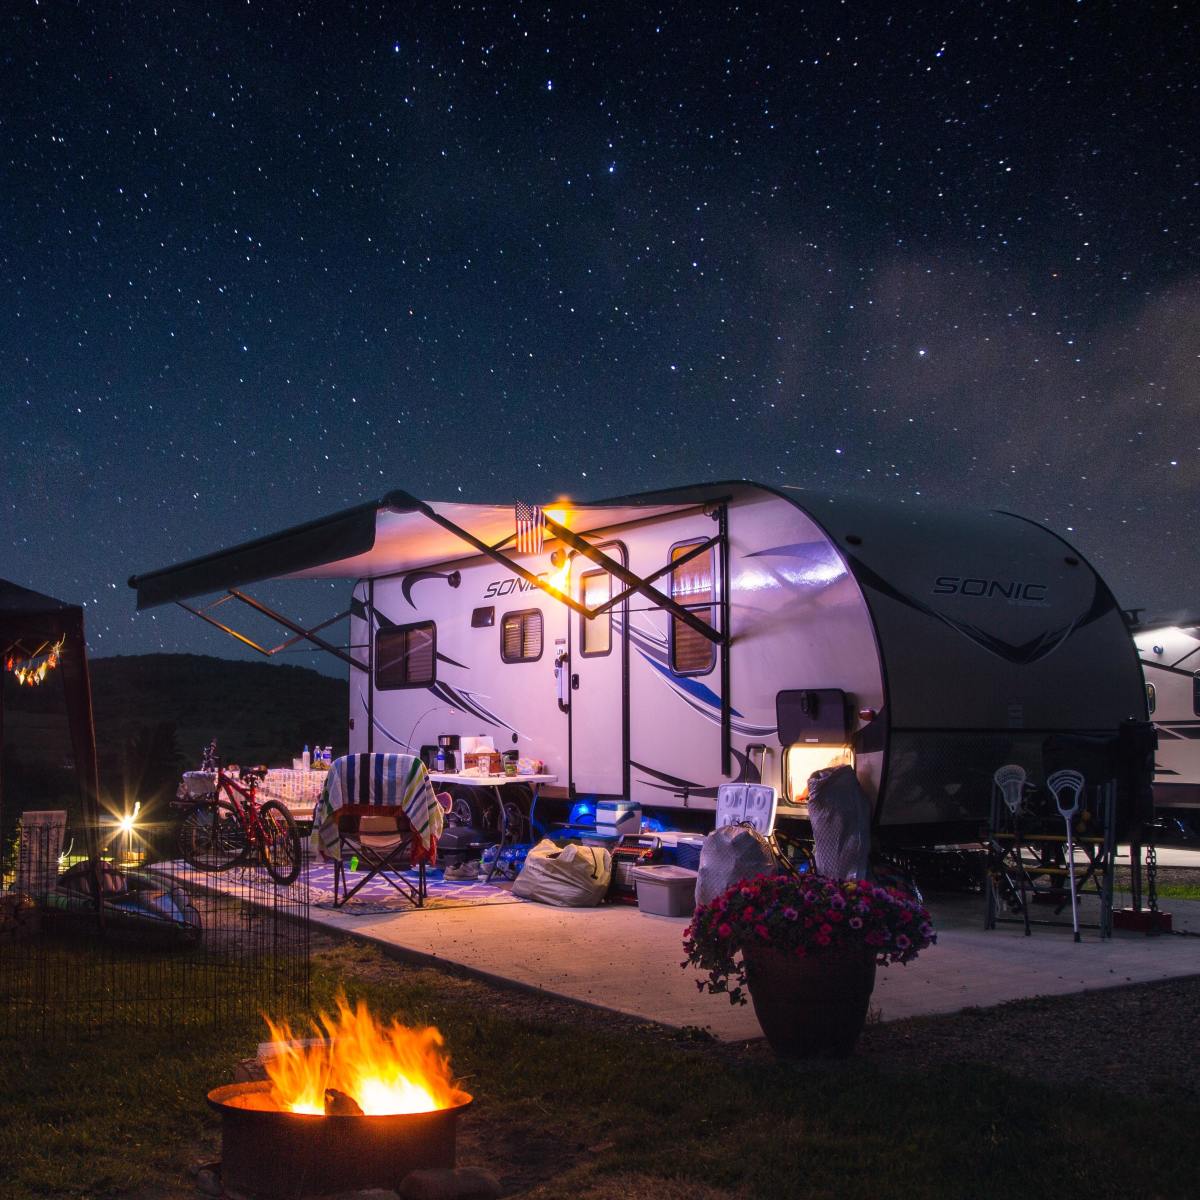 RV awnings are more important than people realize. Learn the basics about how to use and care for them and all their benefits.